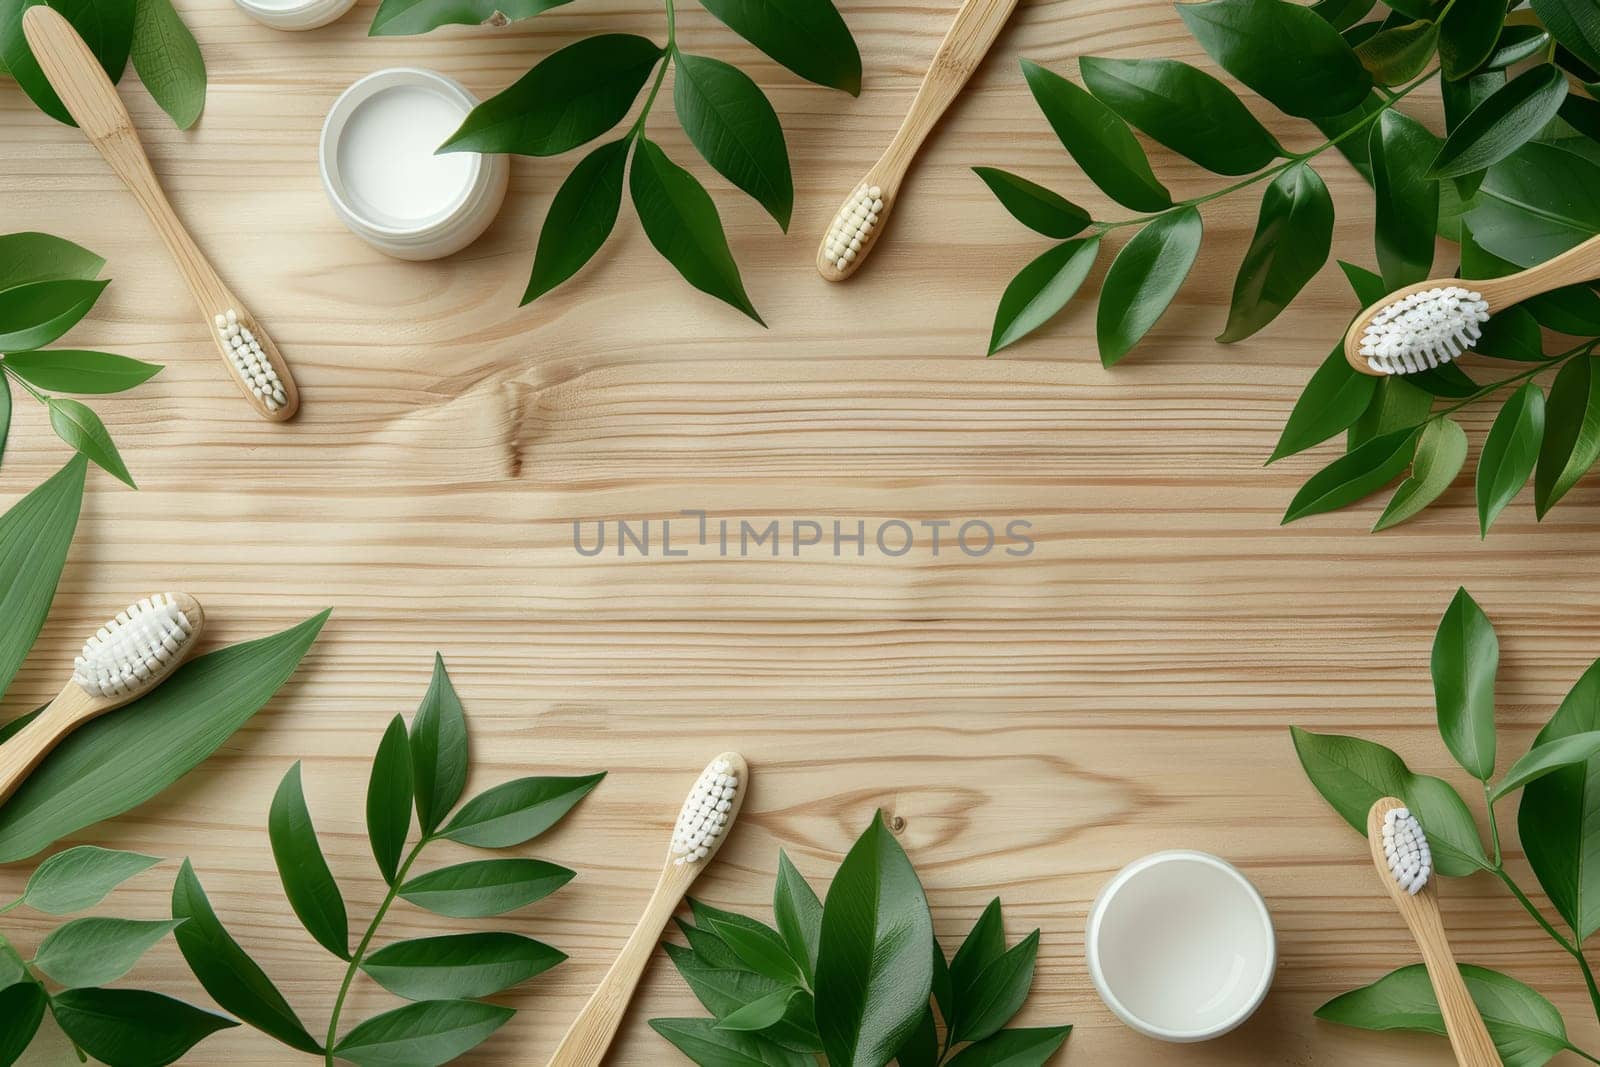 An array of eco-friendly dental products, including biodegradable toothbrushes and natural toothpaste, displayed on a wooden background surrounded by green leaves